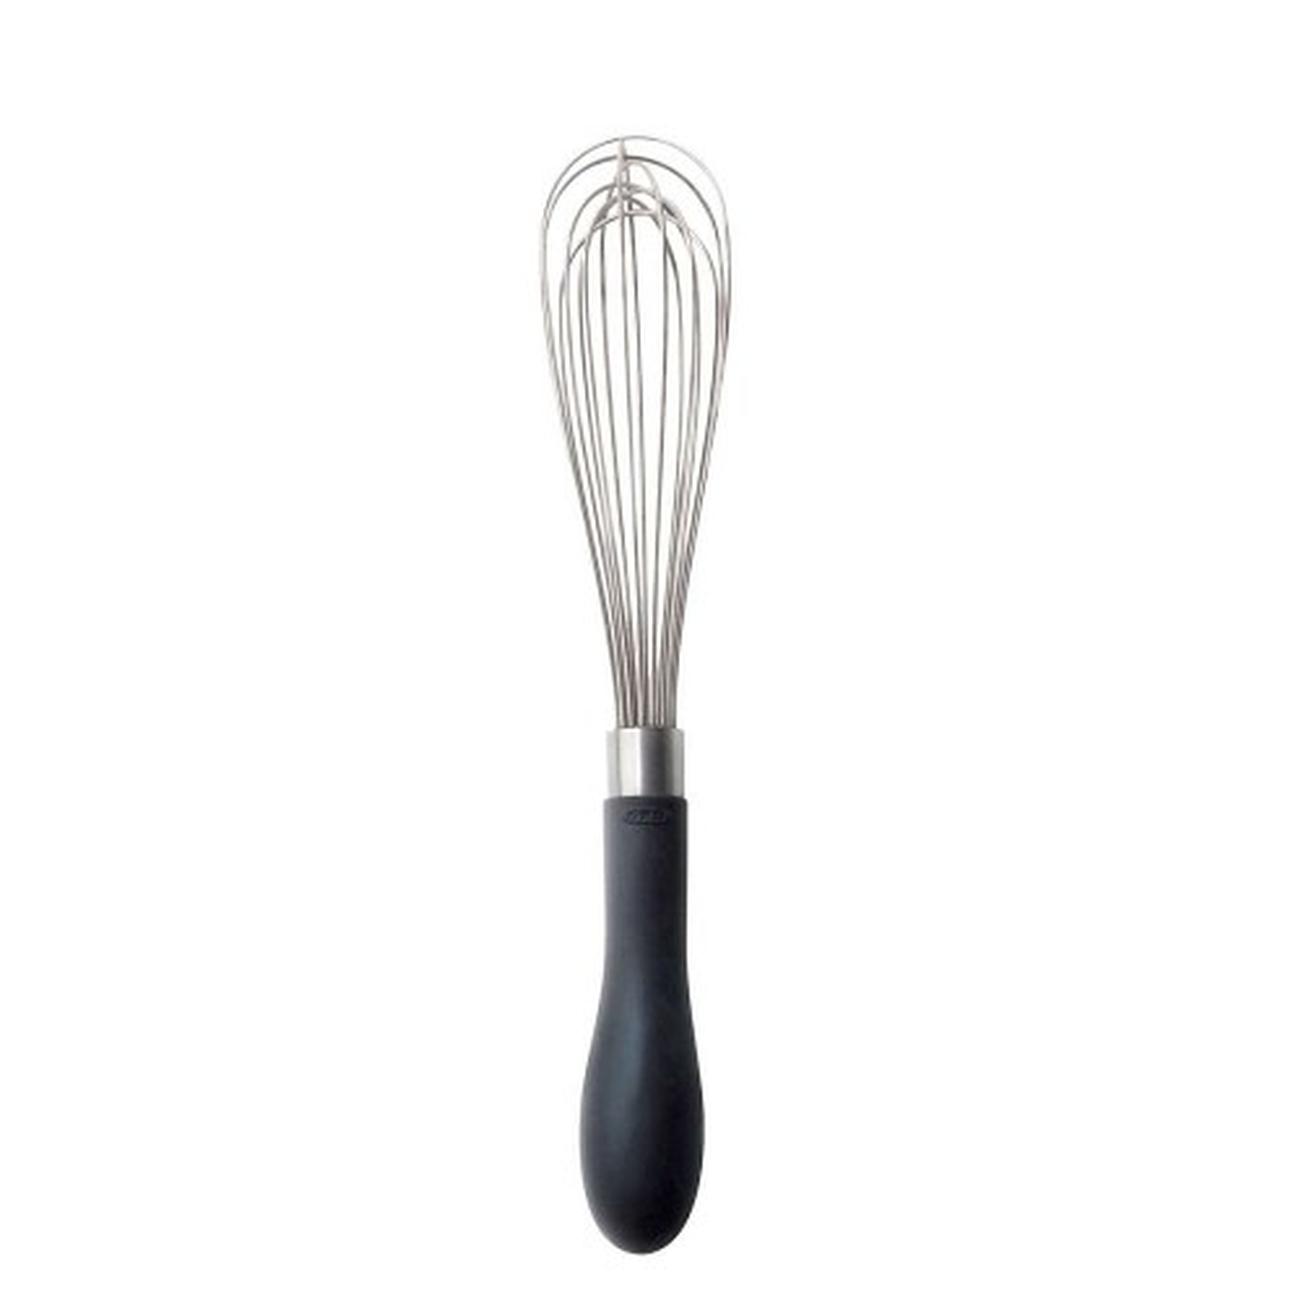 OXO Good Grips 11-Inch Balloon Whisk & 11-Inch Silicone Balloon Whisk - Red